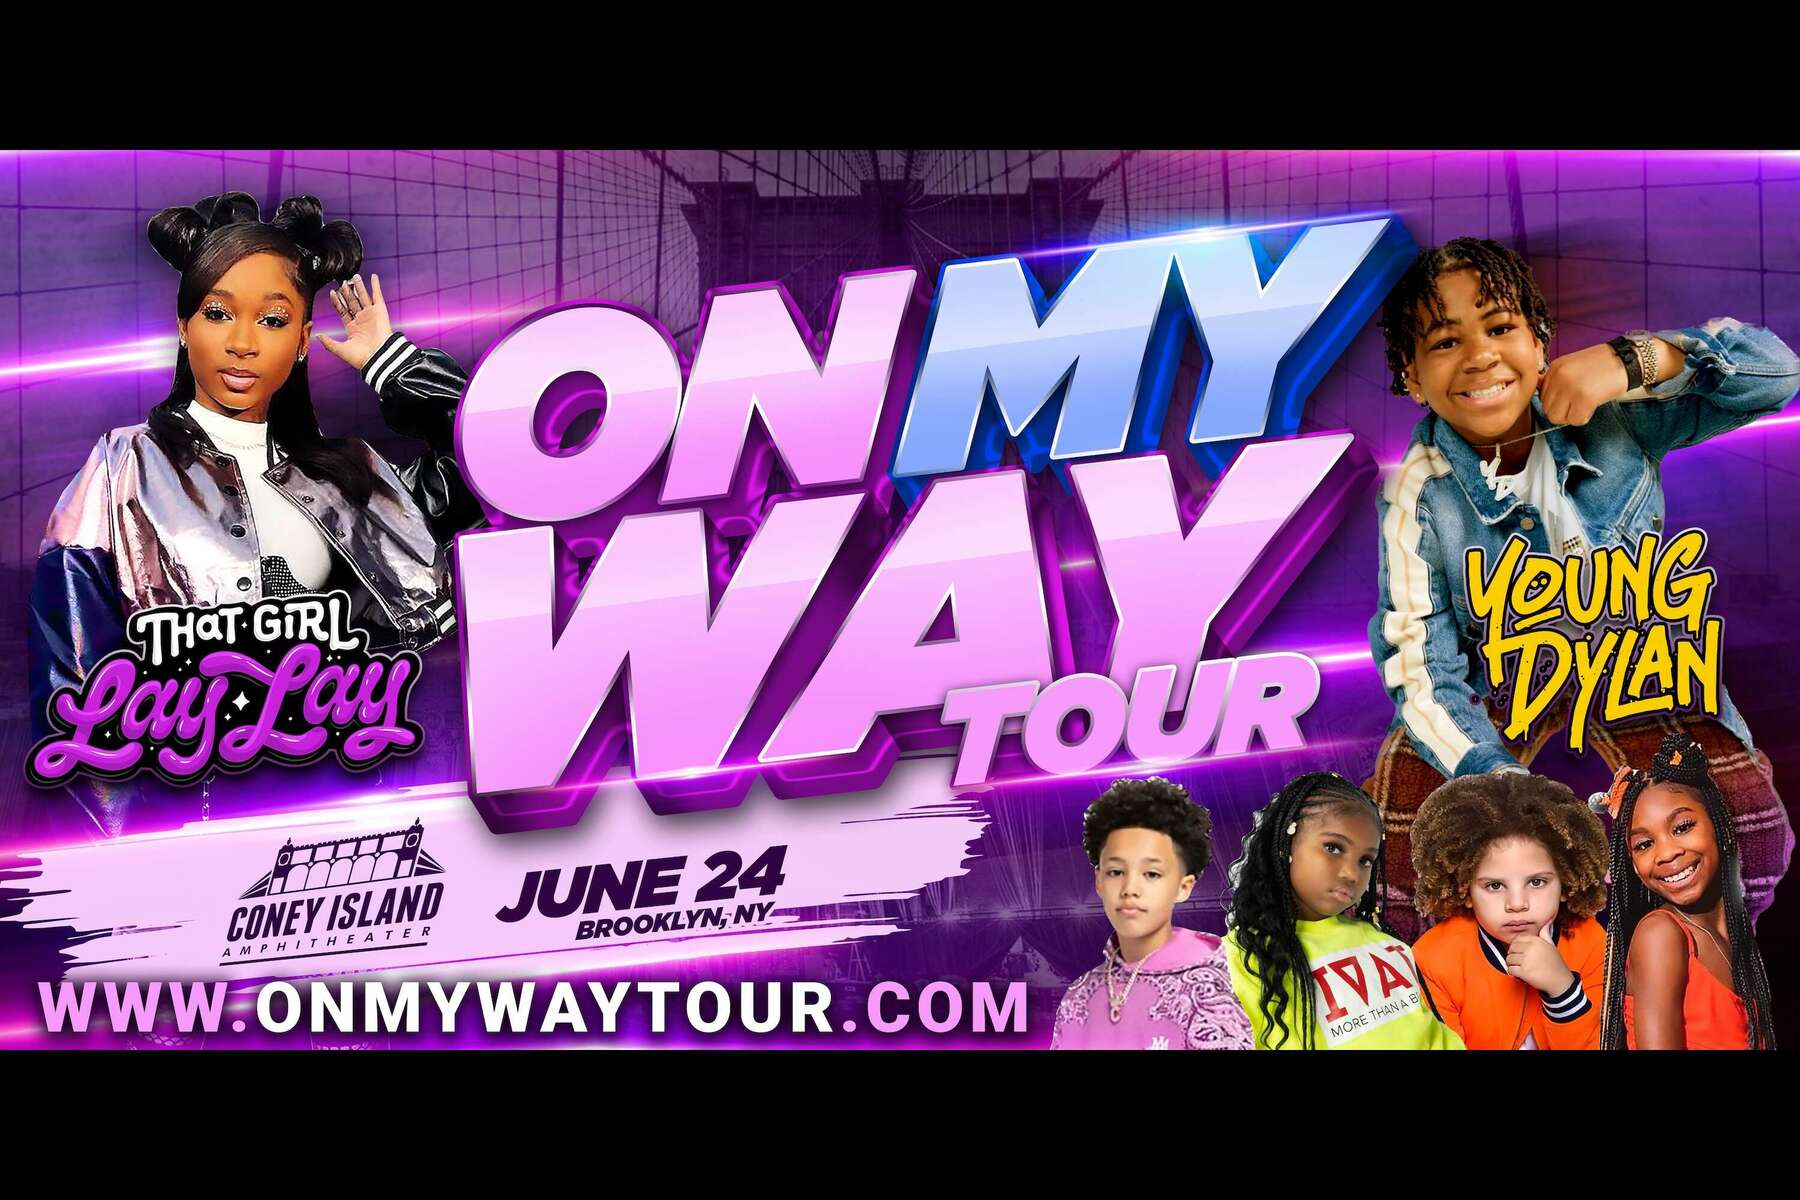 On My Way Tour: That Girl Lay Lay & Young Dylan Live Show